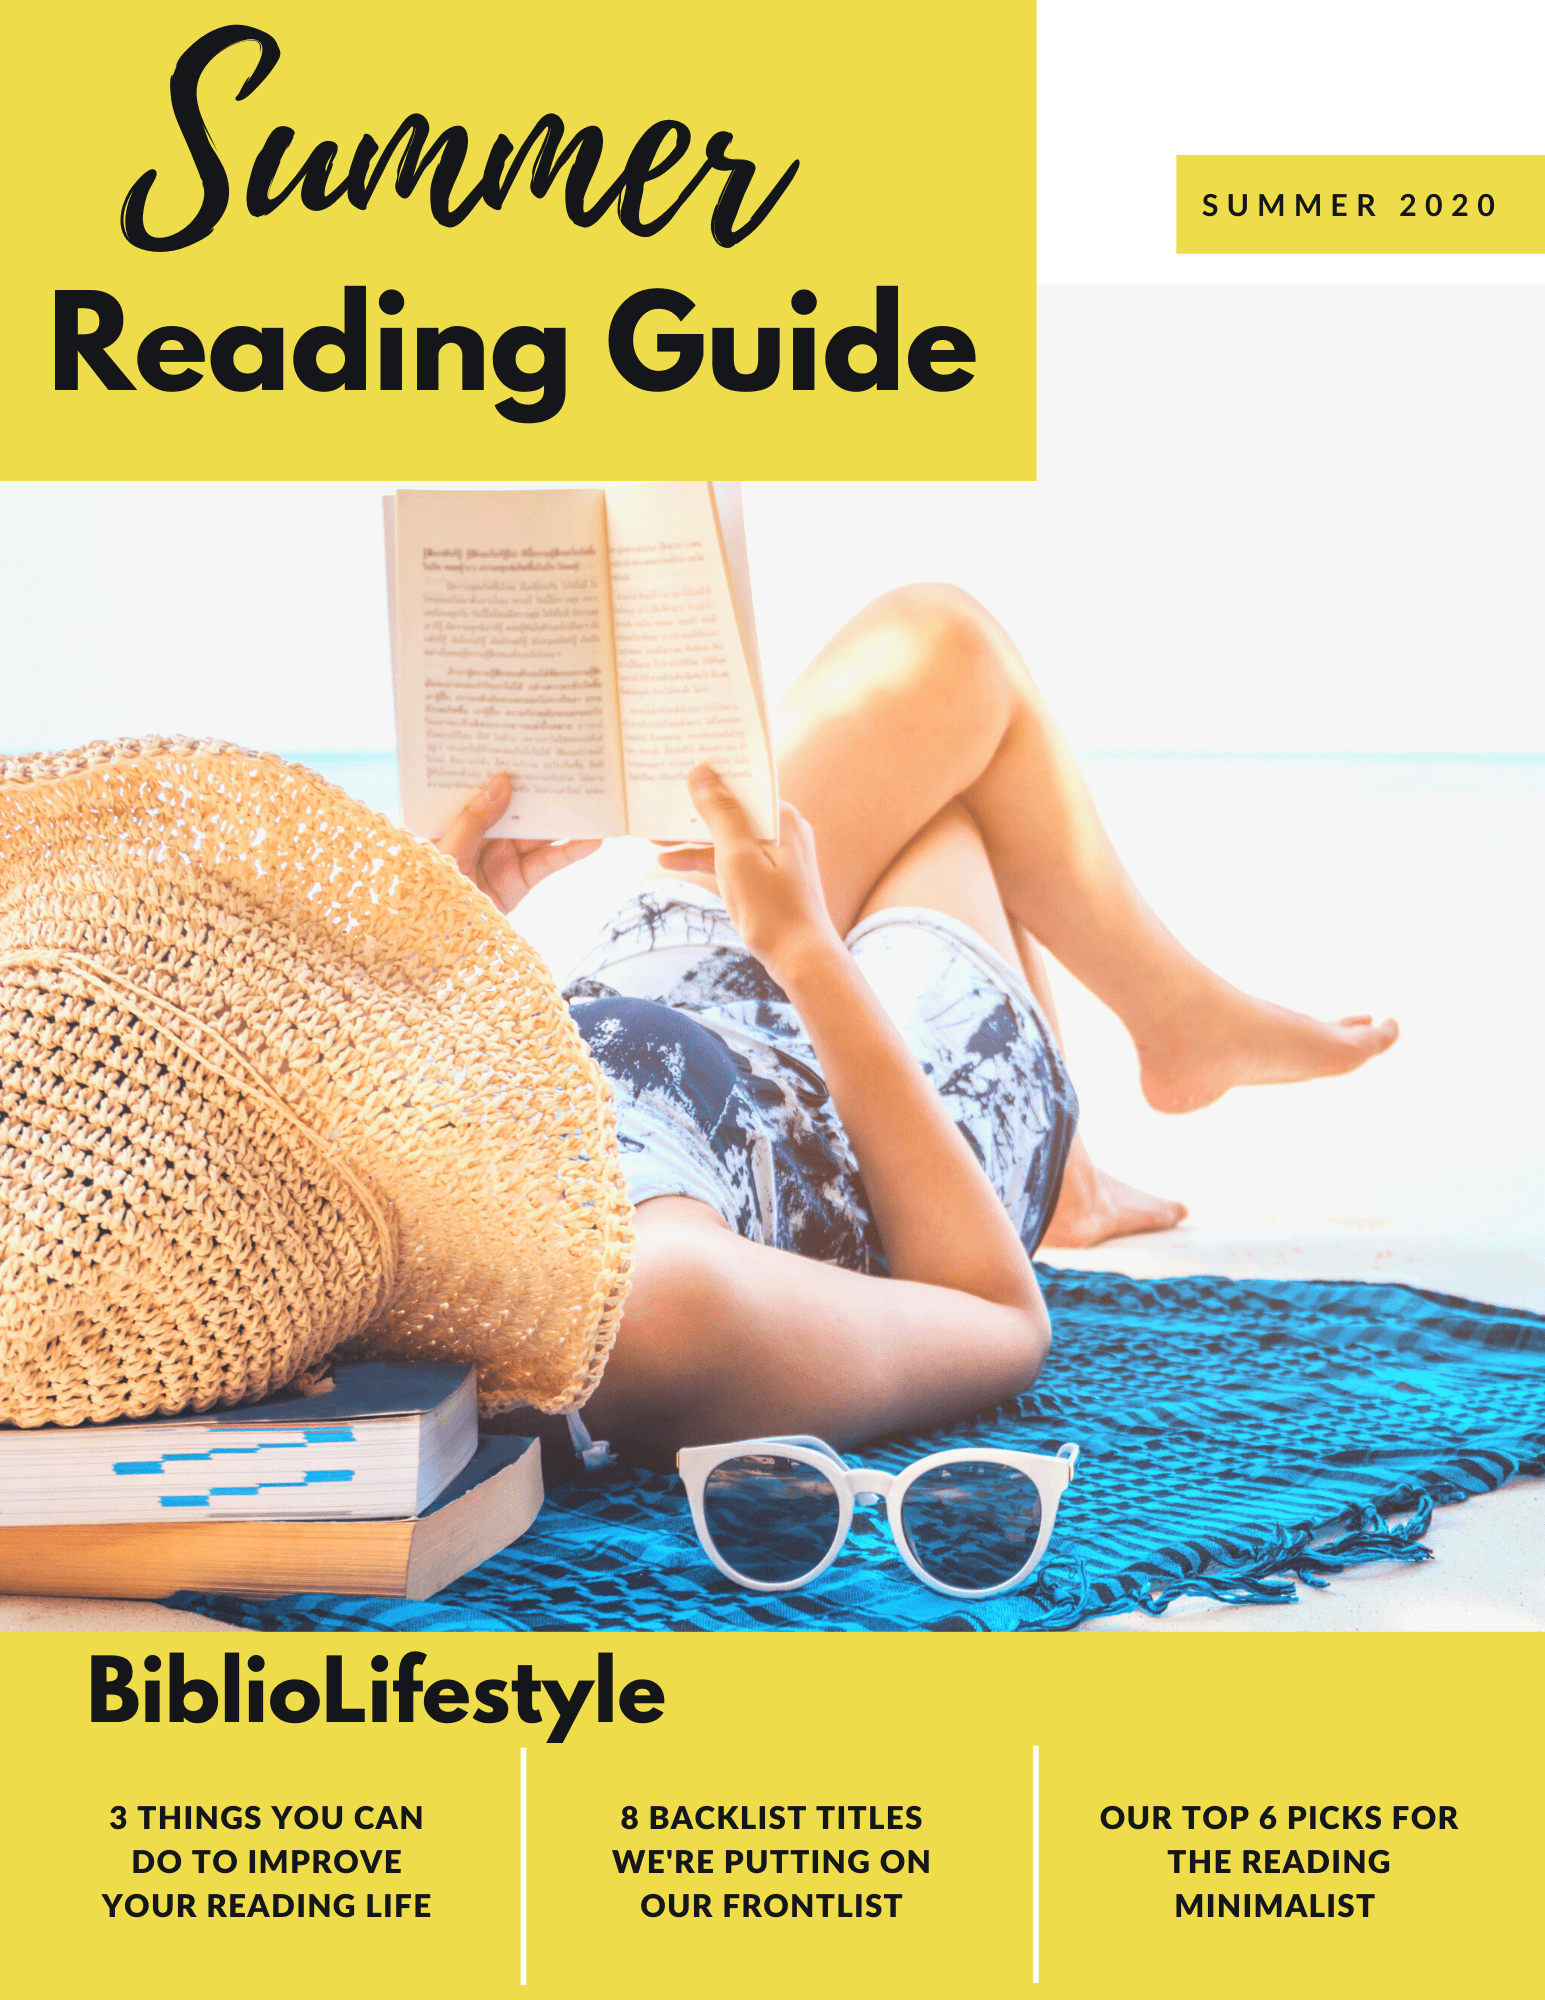 The 2020 BiblioLifestyle Summer Reading Guide